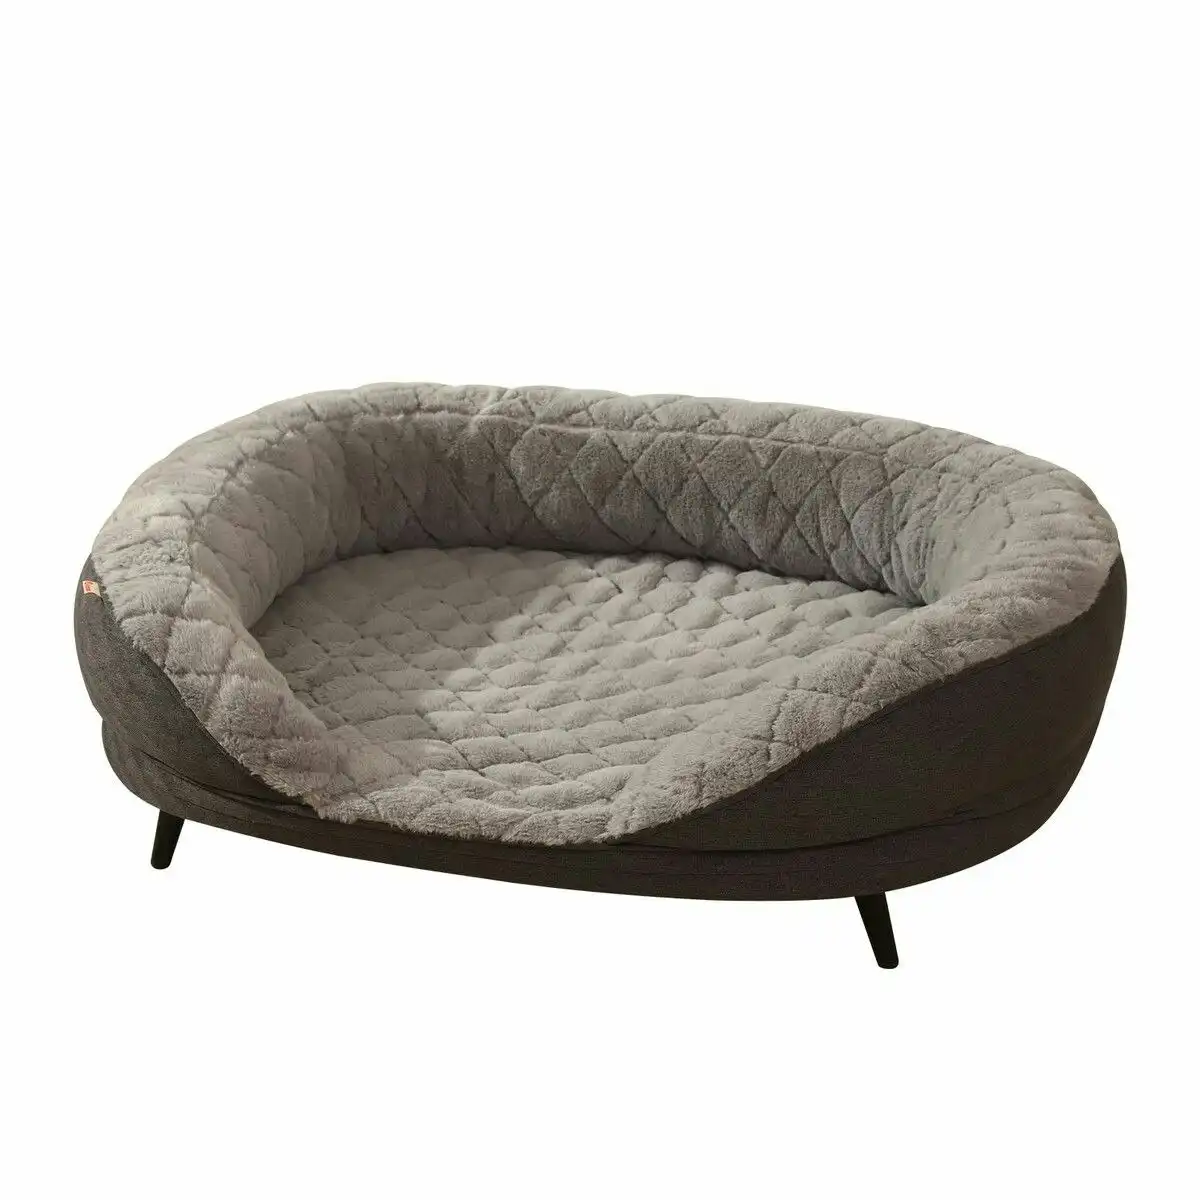 Pet Scene Raised Dog Bed Cat Couch Puppy Sofa Doggy Soft Cushioned Lounge Pet Chaise Furniture Crate Fabric Angora 90x78x29cm